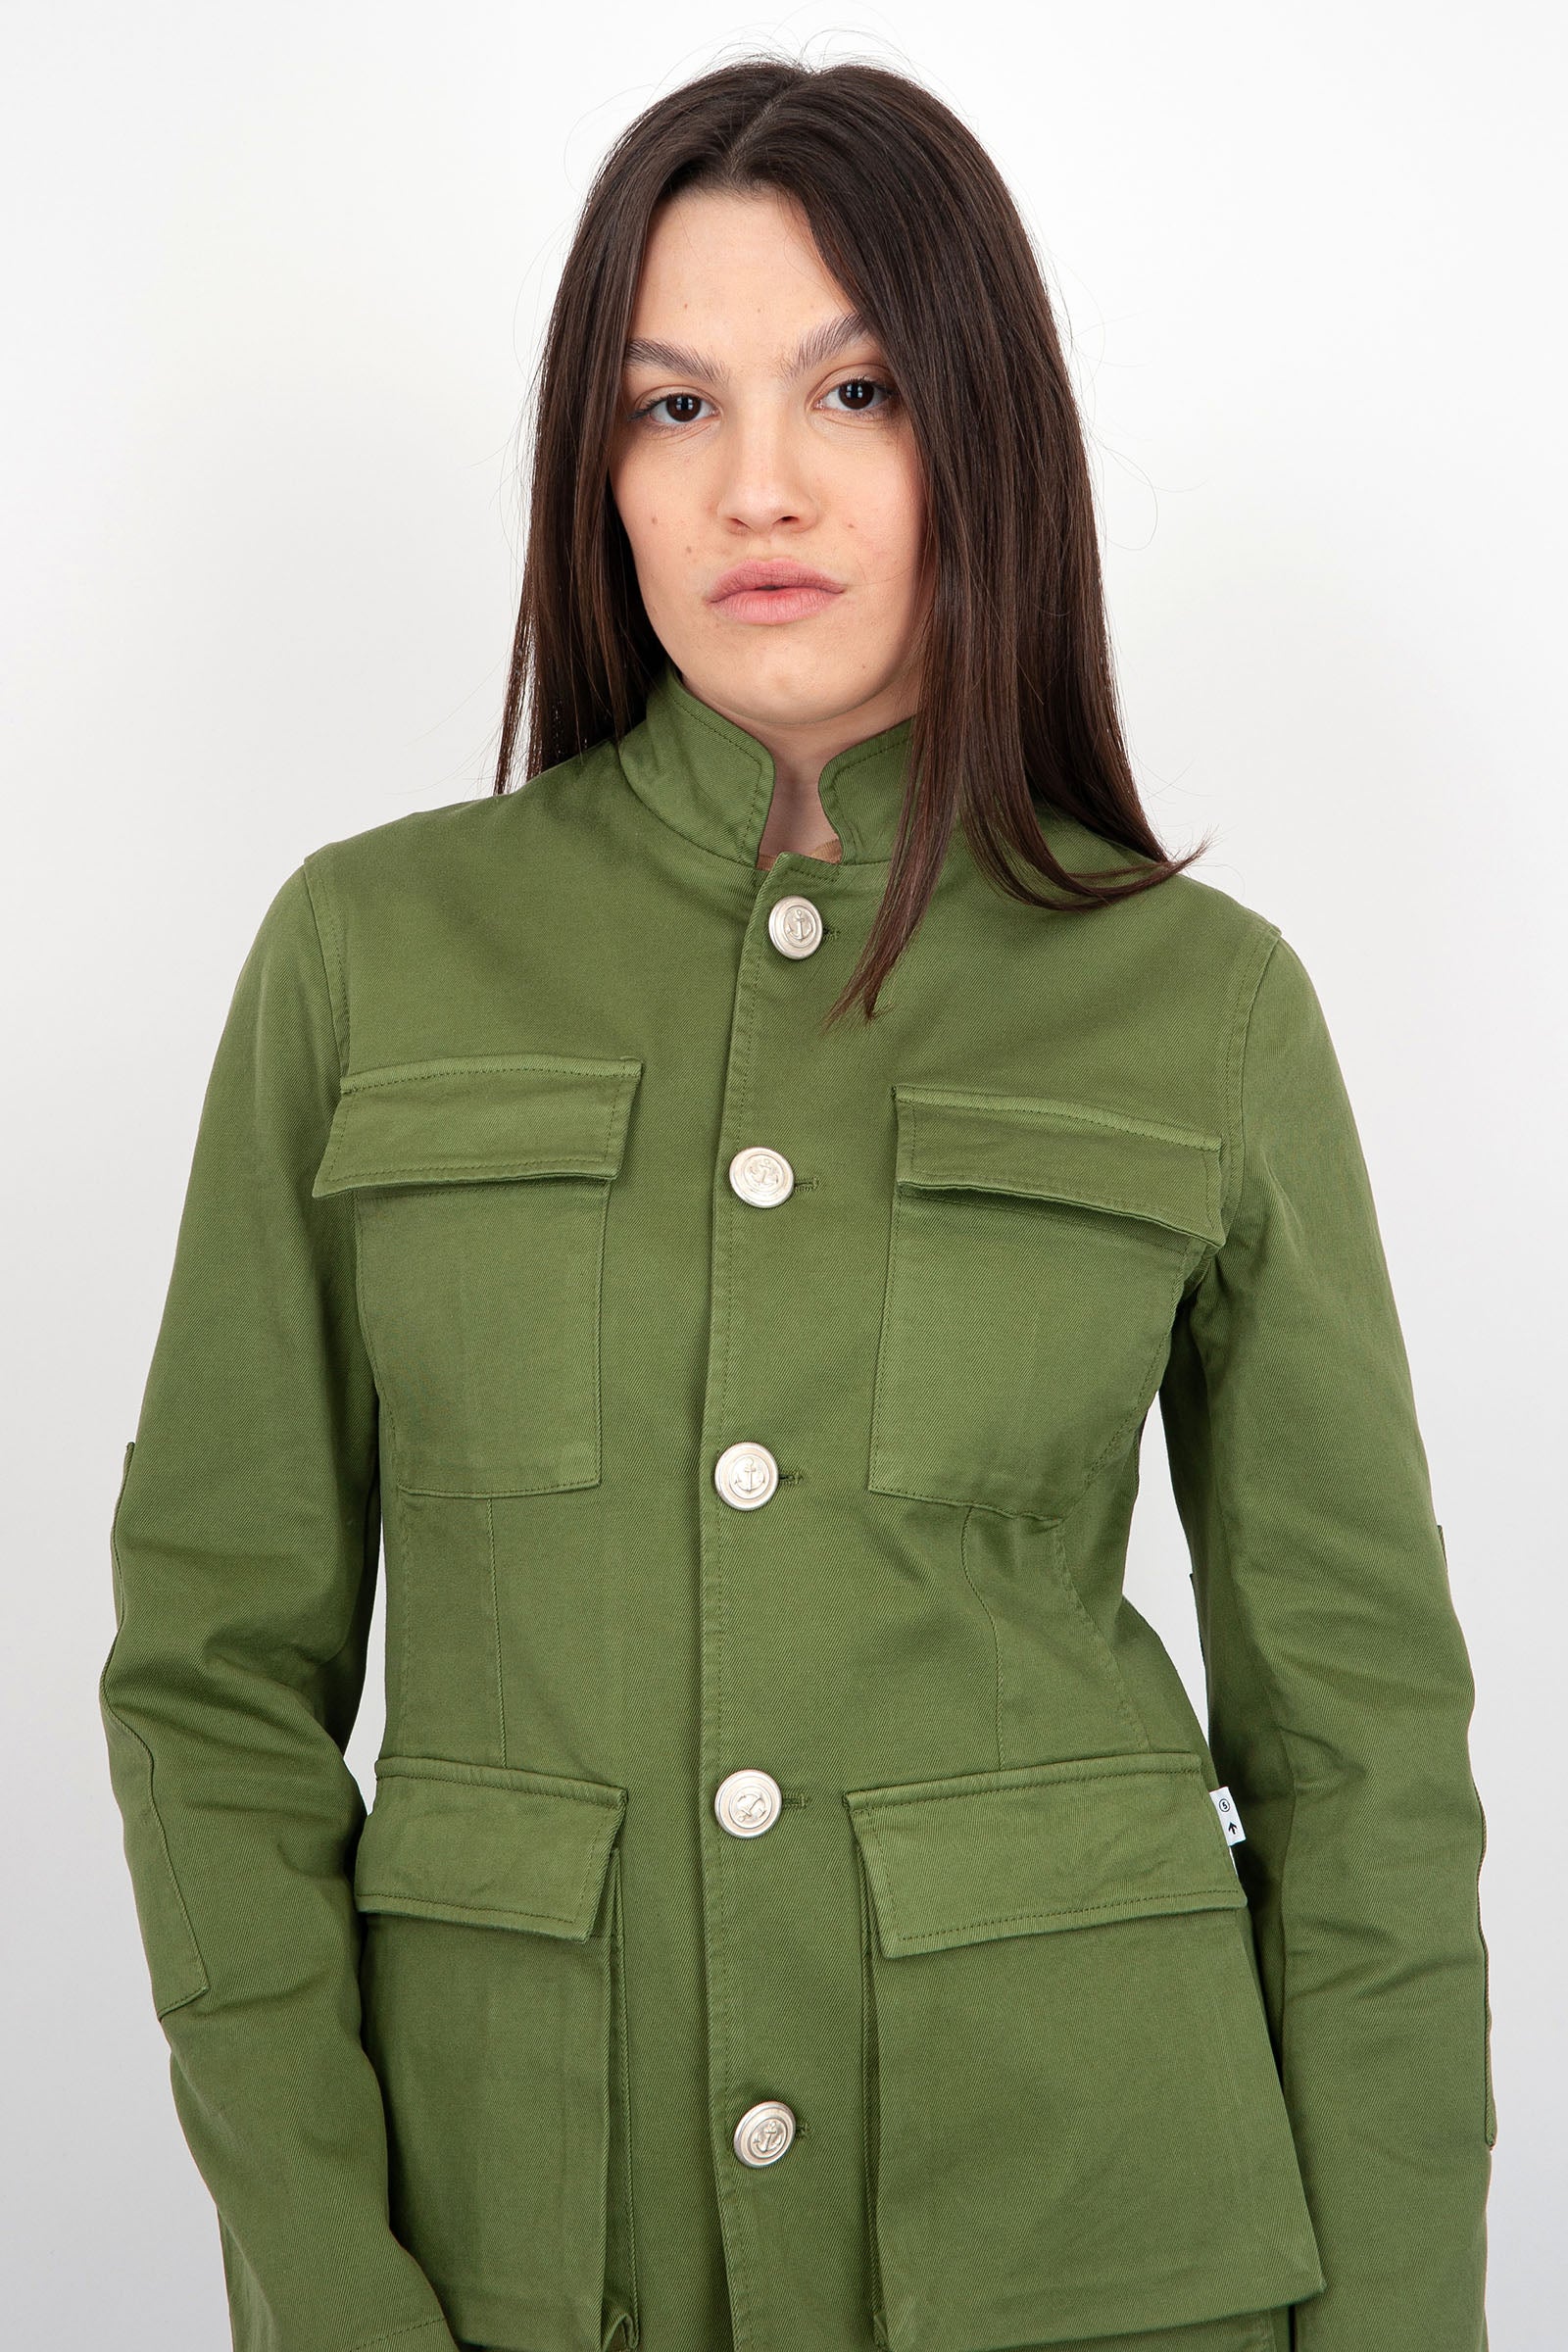 Department Five Green Military Cotton Field Jacket - 5